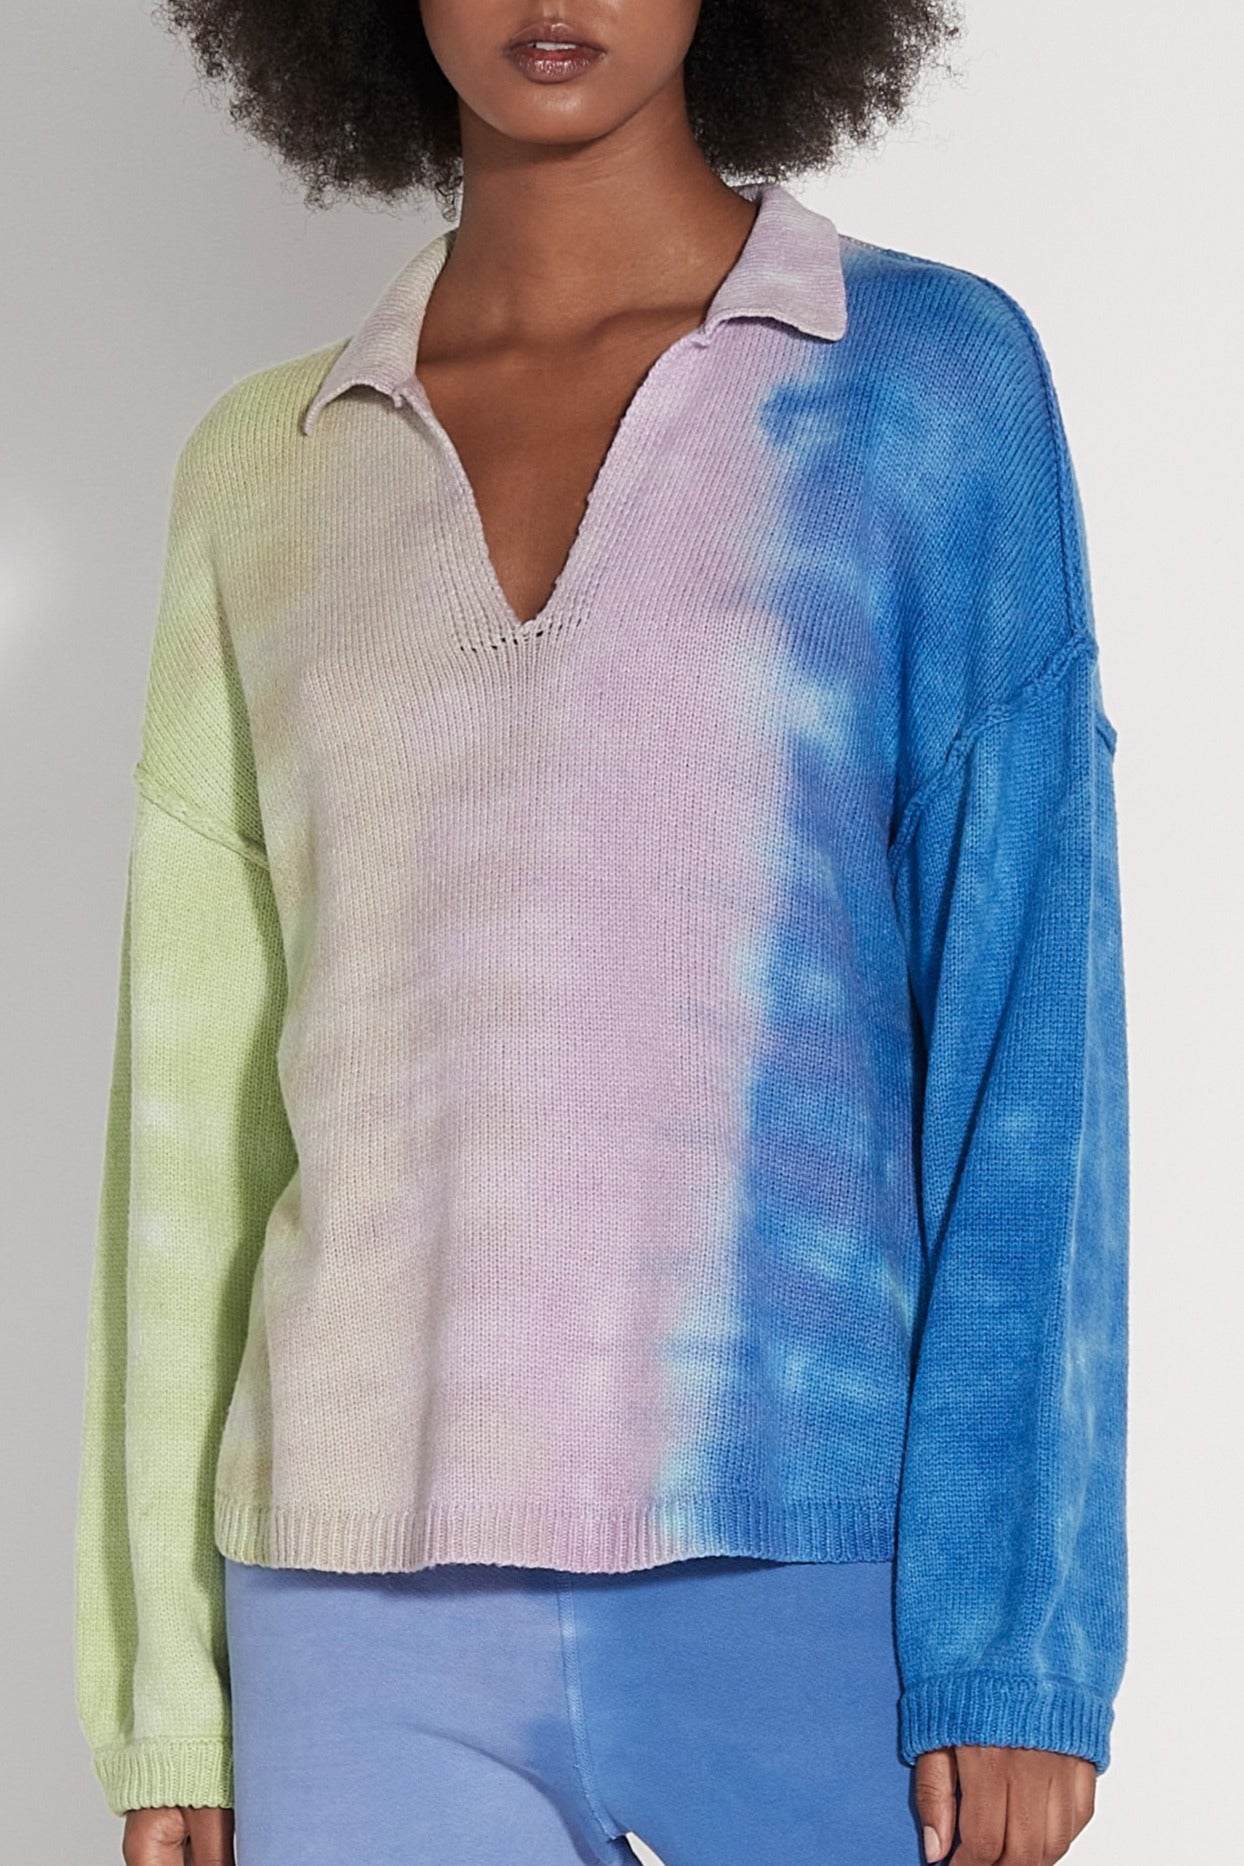 Lime, Lavendar, Blue Tie Dye Sweater Diana Polo RA-SWEATER ARCHIVE-SPRING1'23   